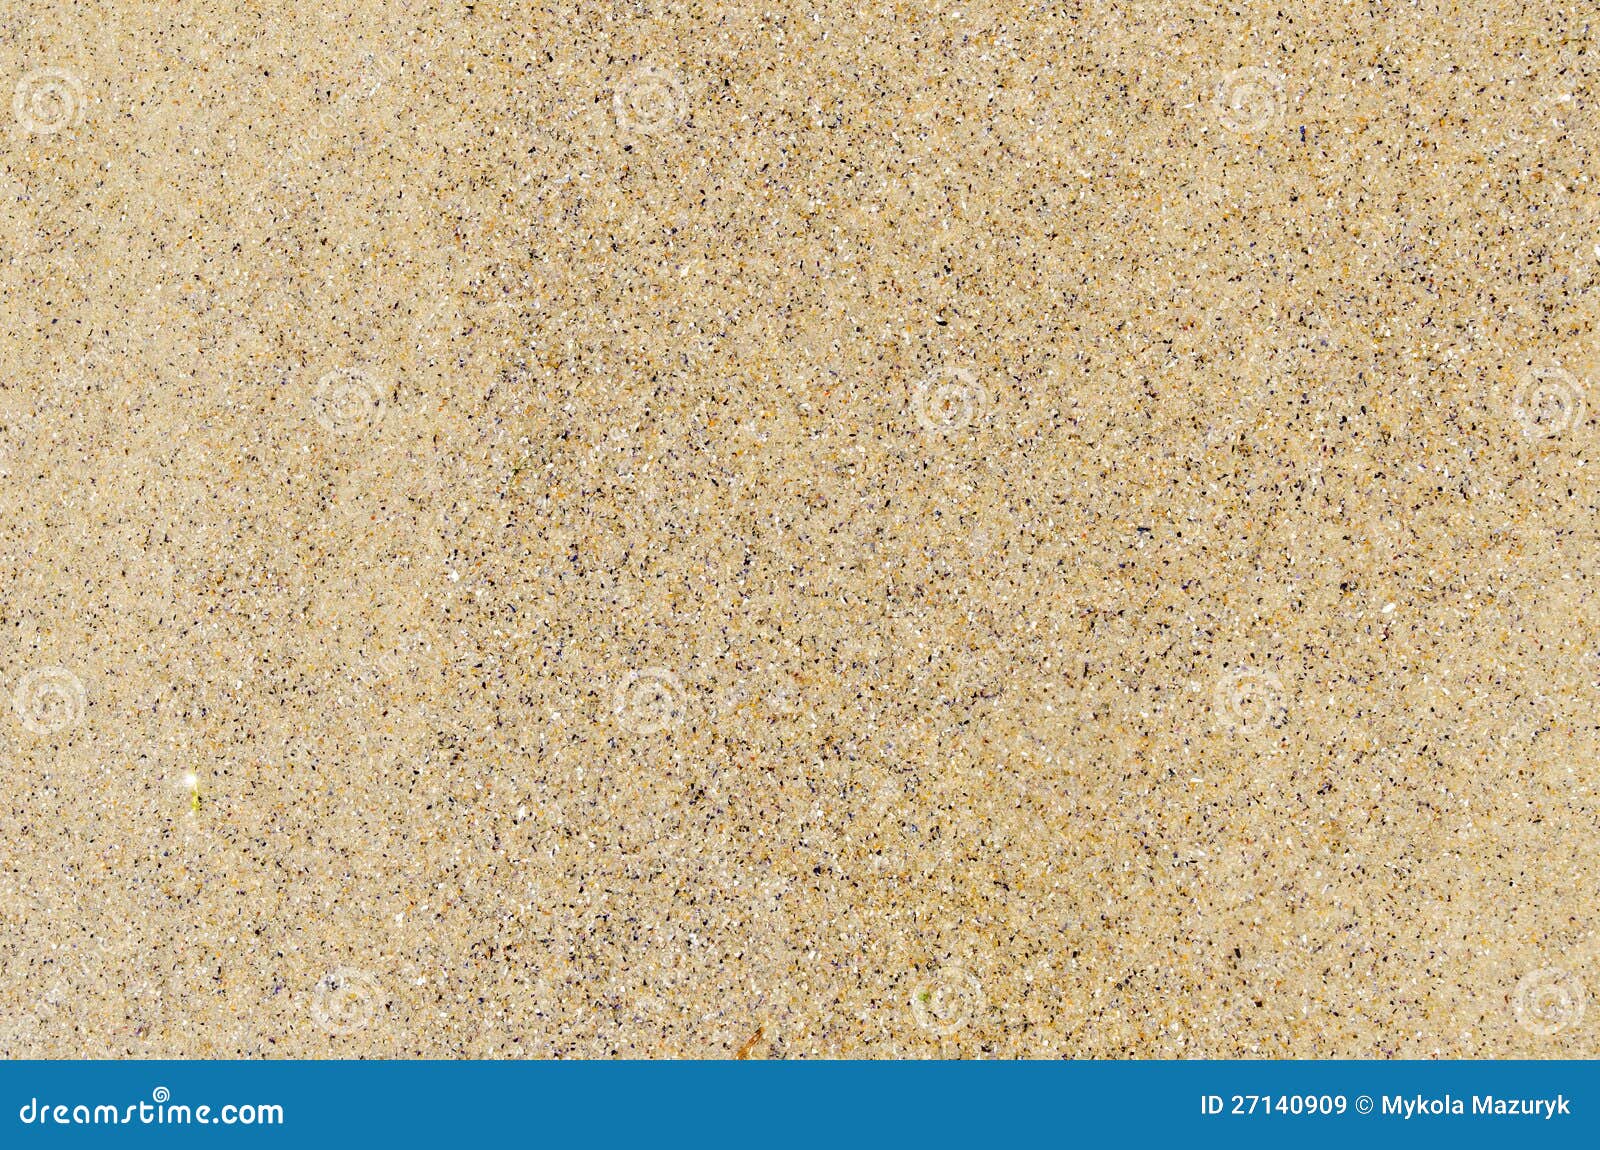 Sand As Textured Background Stock Image - Image of concrete, design ...